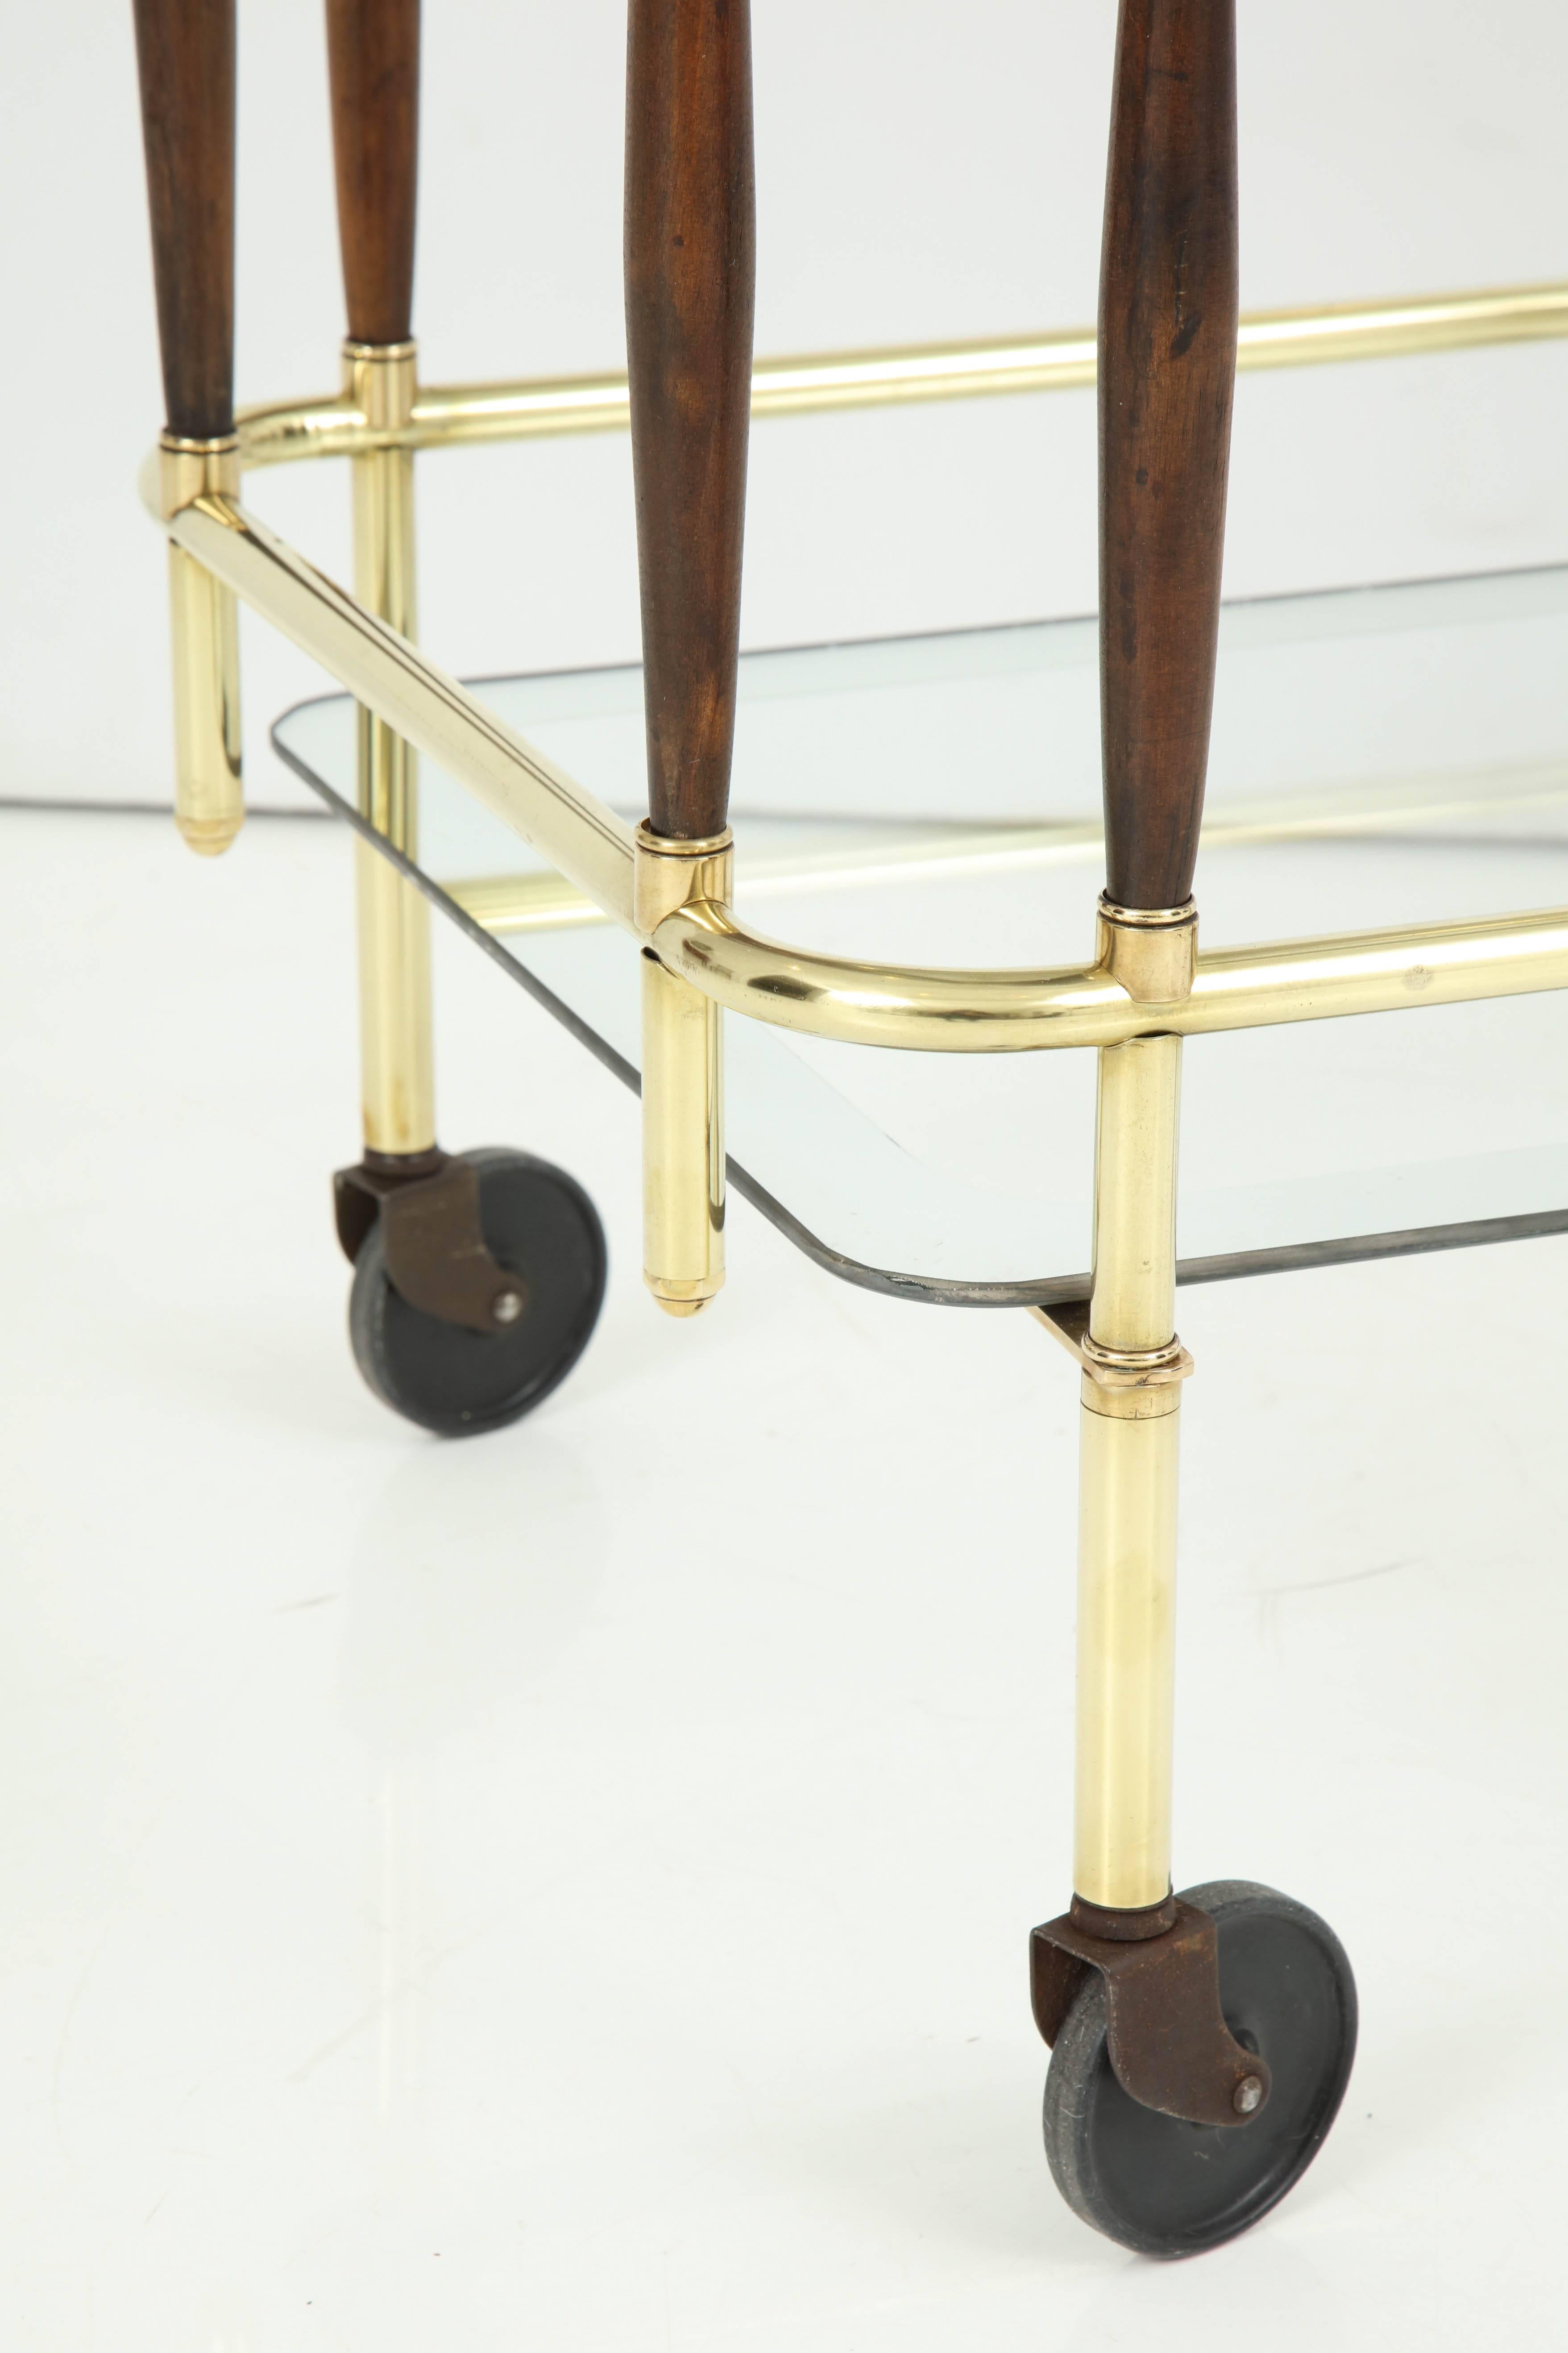 Polished Bar Cart, Mid-Century Modern, Brass with Dark Wood Details, American Bar, C 1950 For Sale